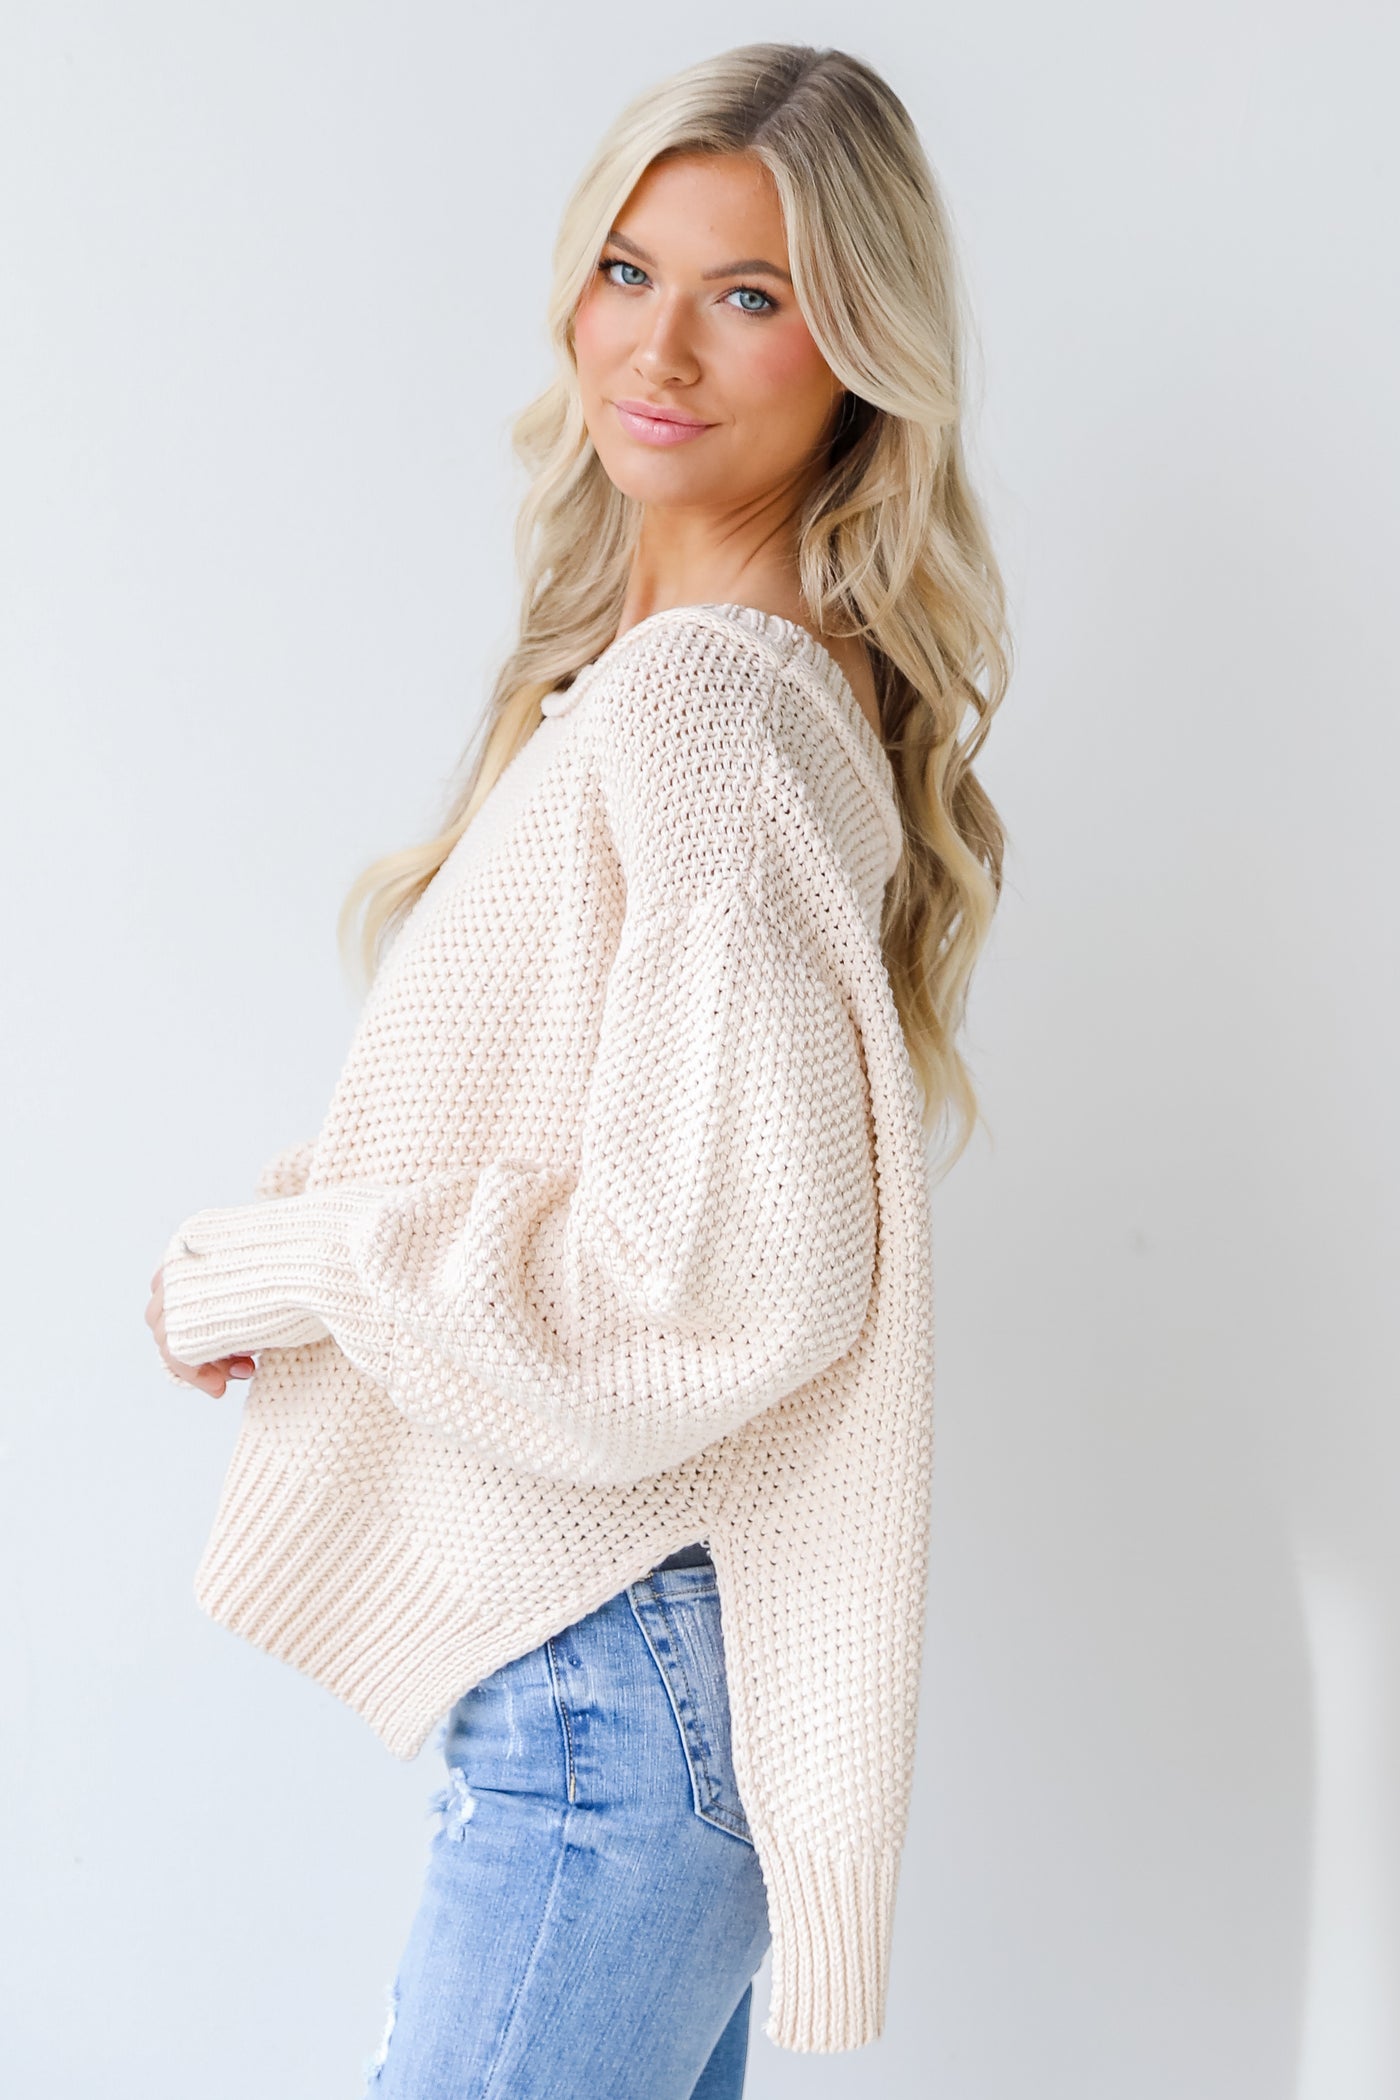 Sweater in ivory side view